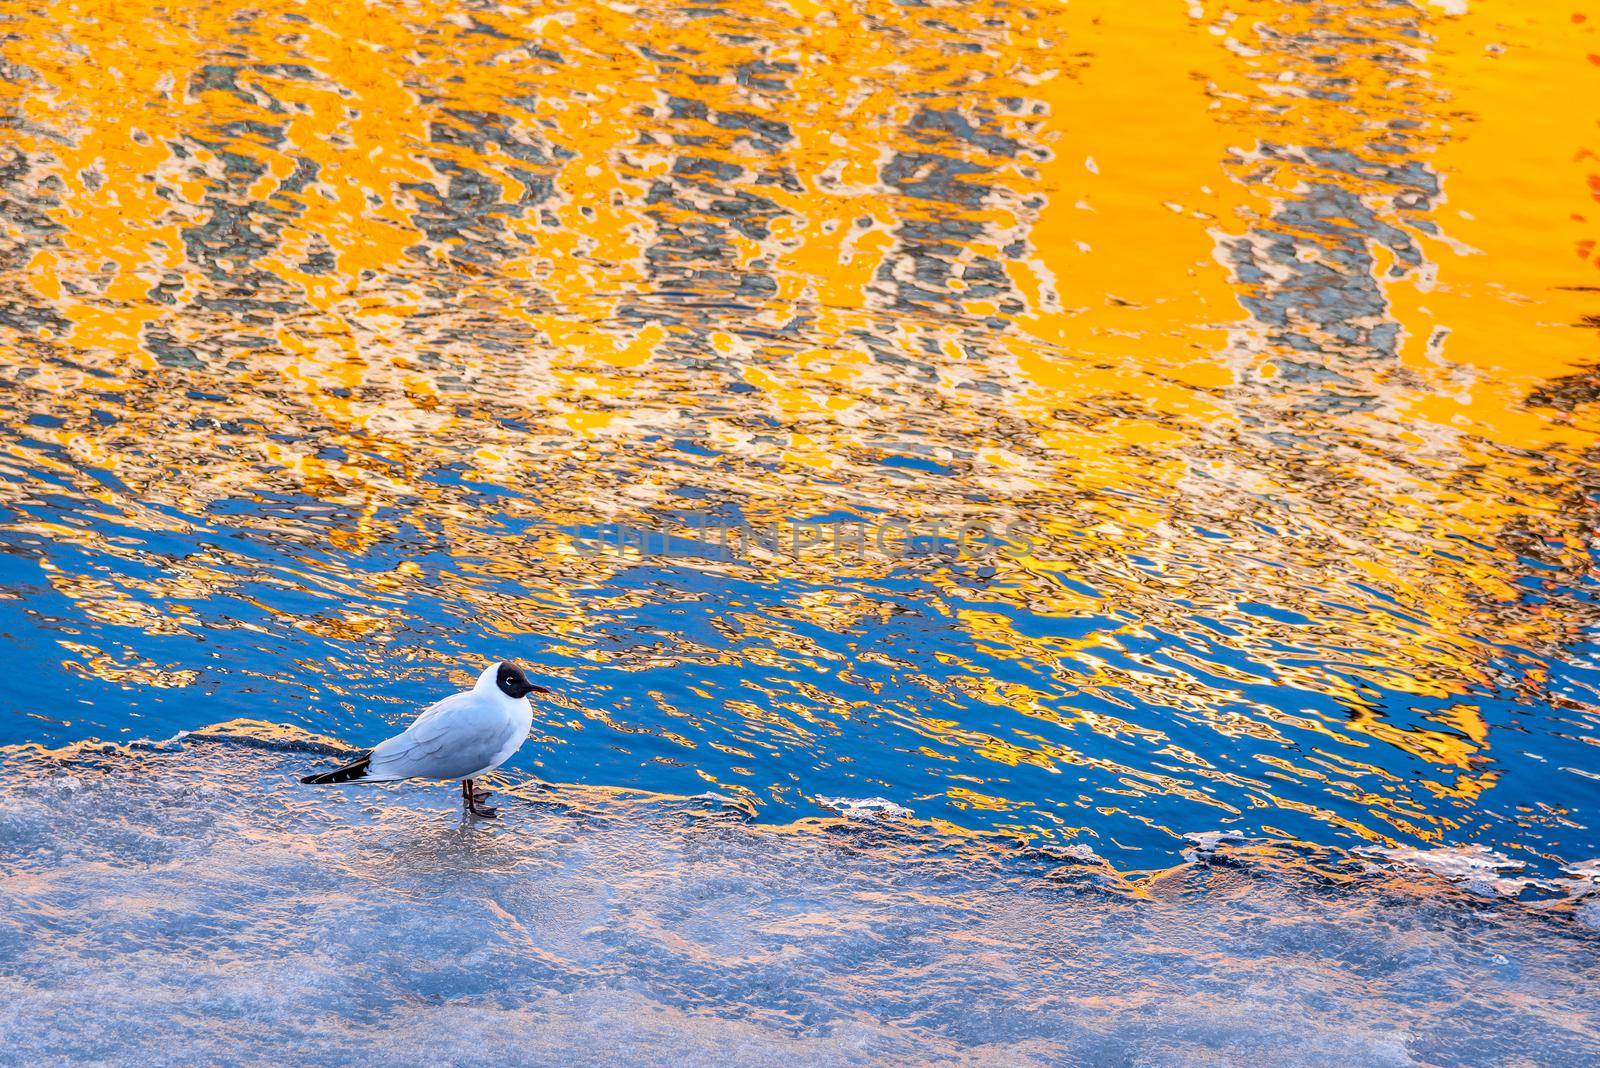 Bird stand on the ice in frozen canal with colourful reflection on water by sunshine  by Nuamfolio